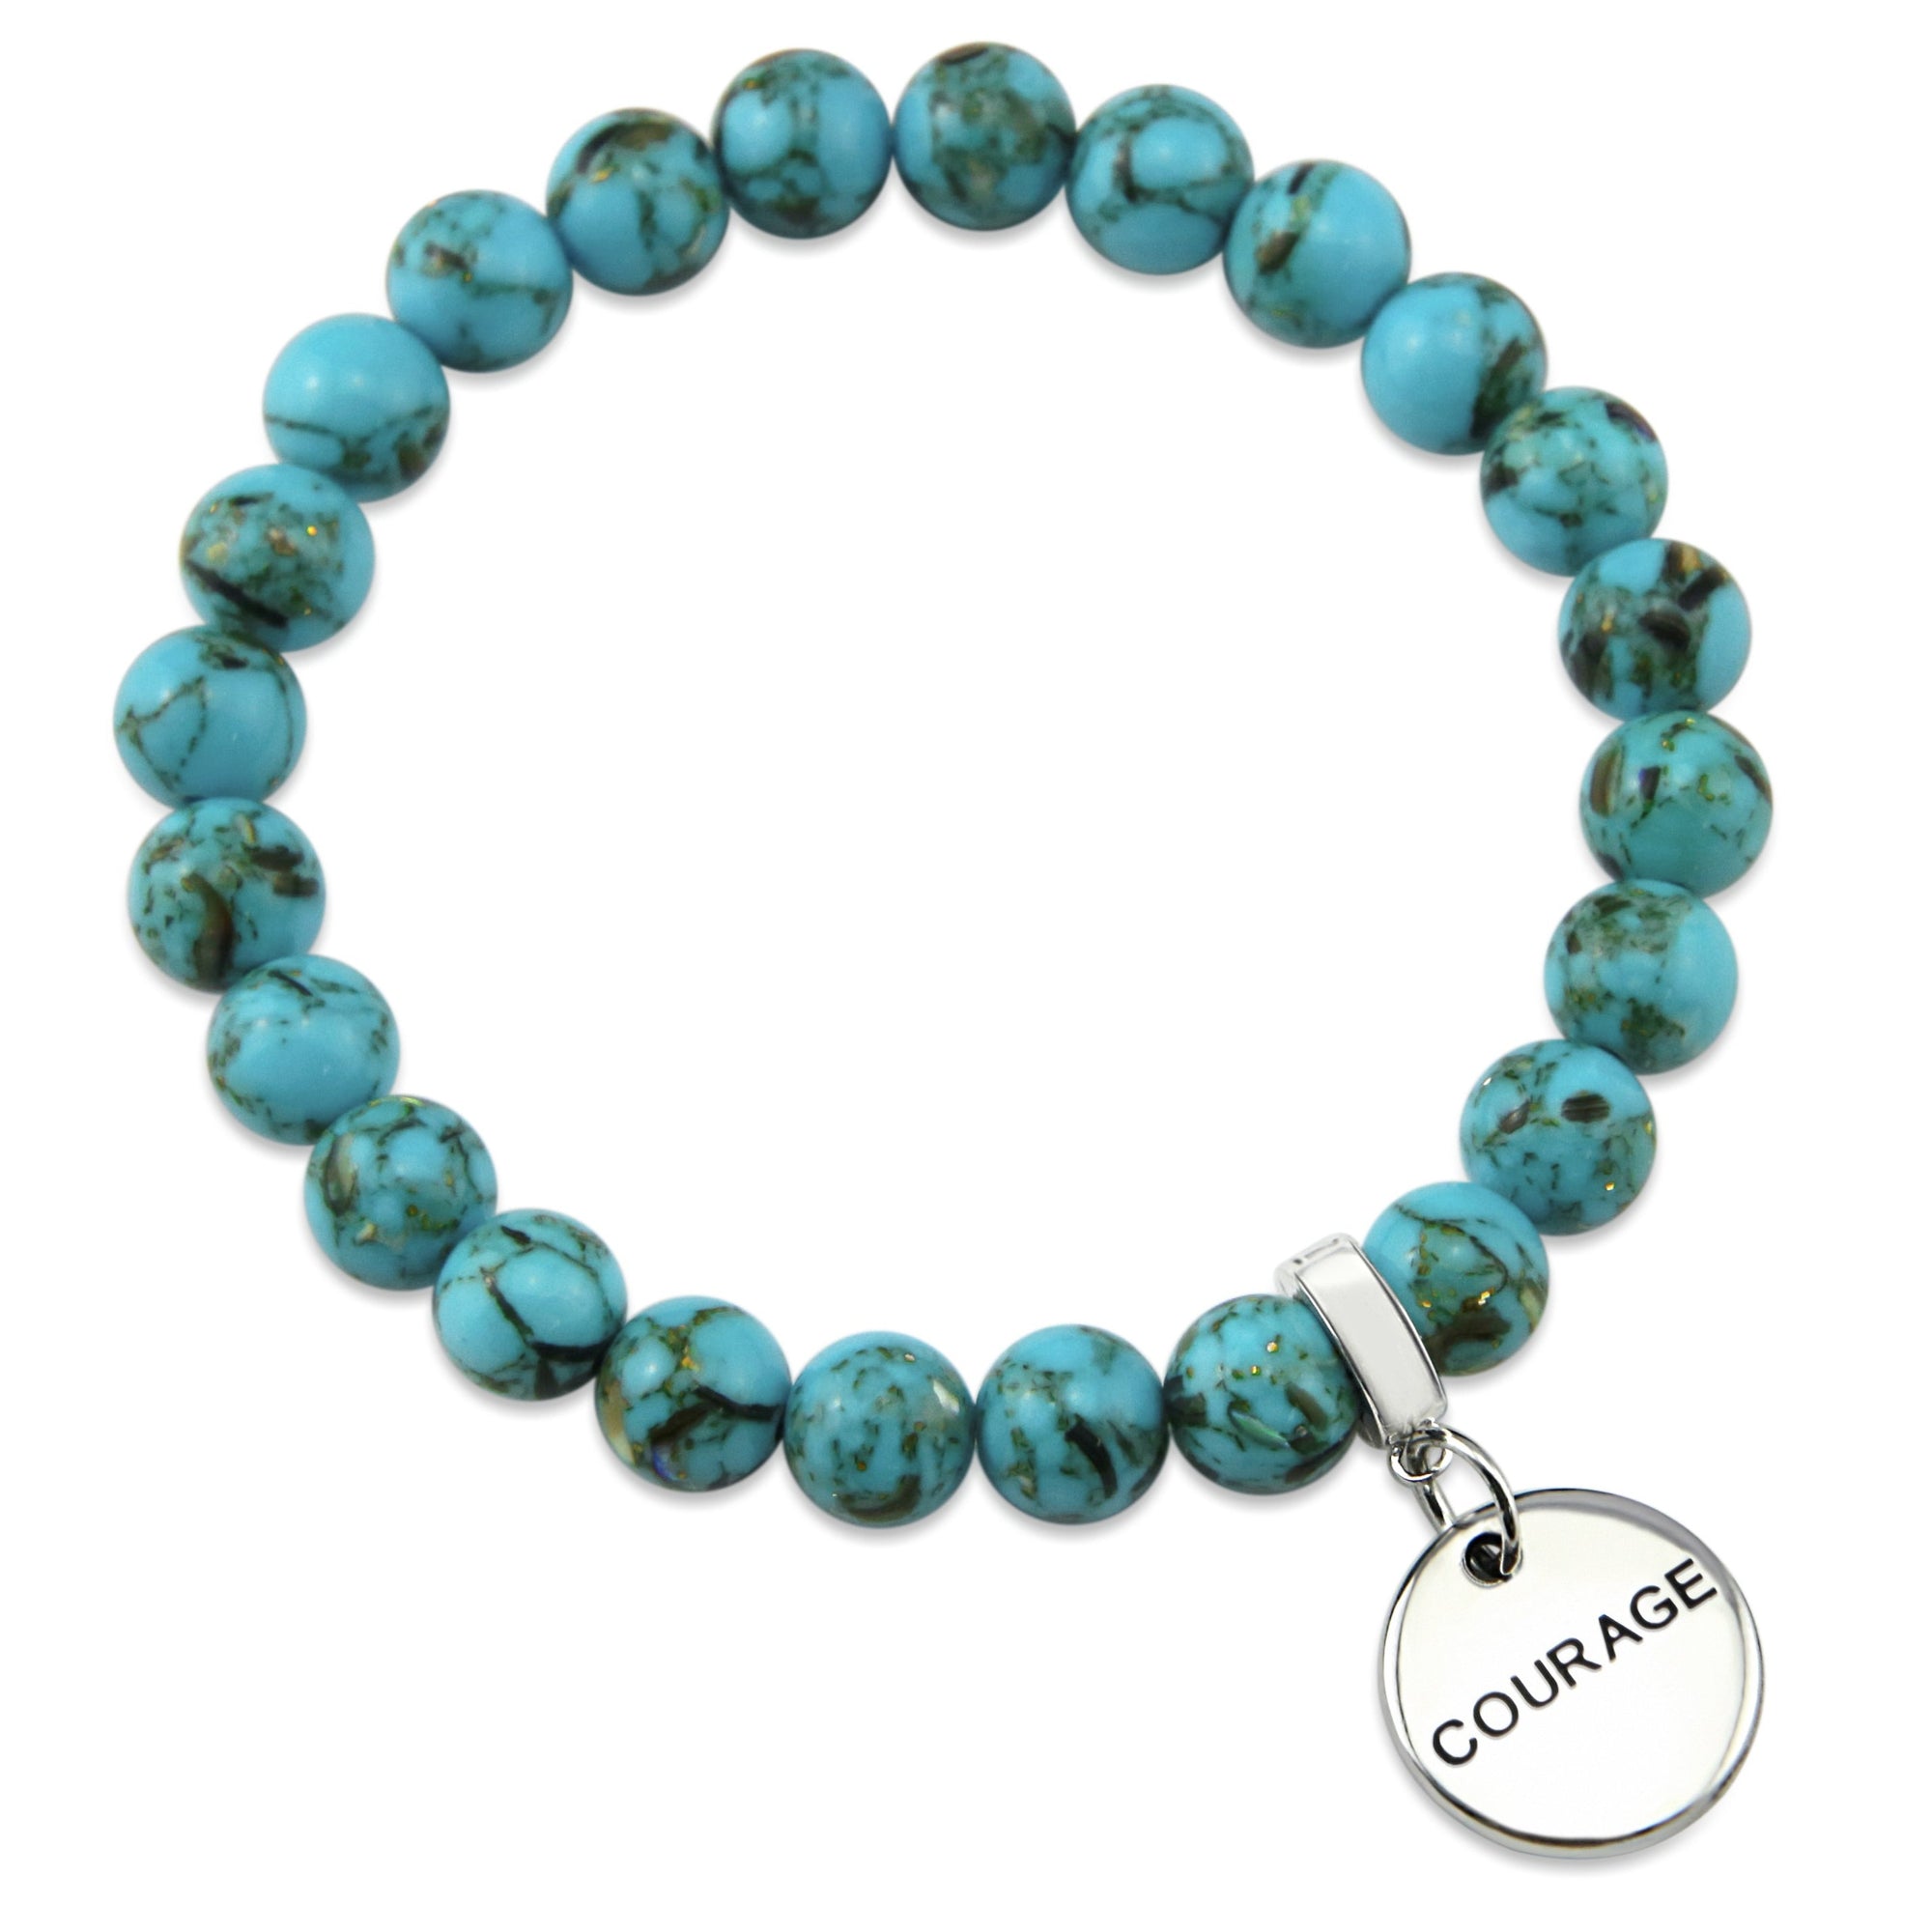 Teal coloured stone bracelet with word charm and silver clip. 